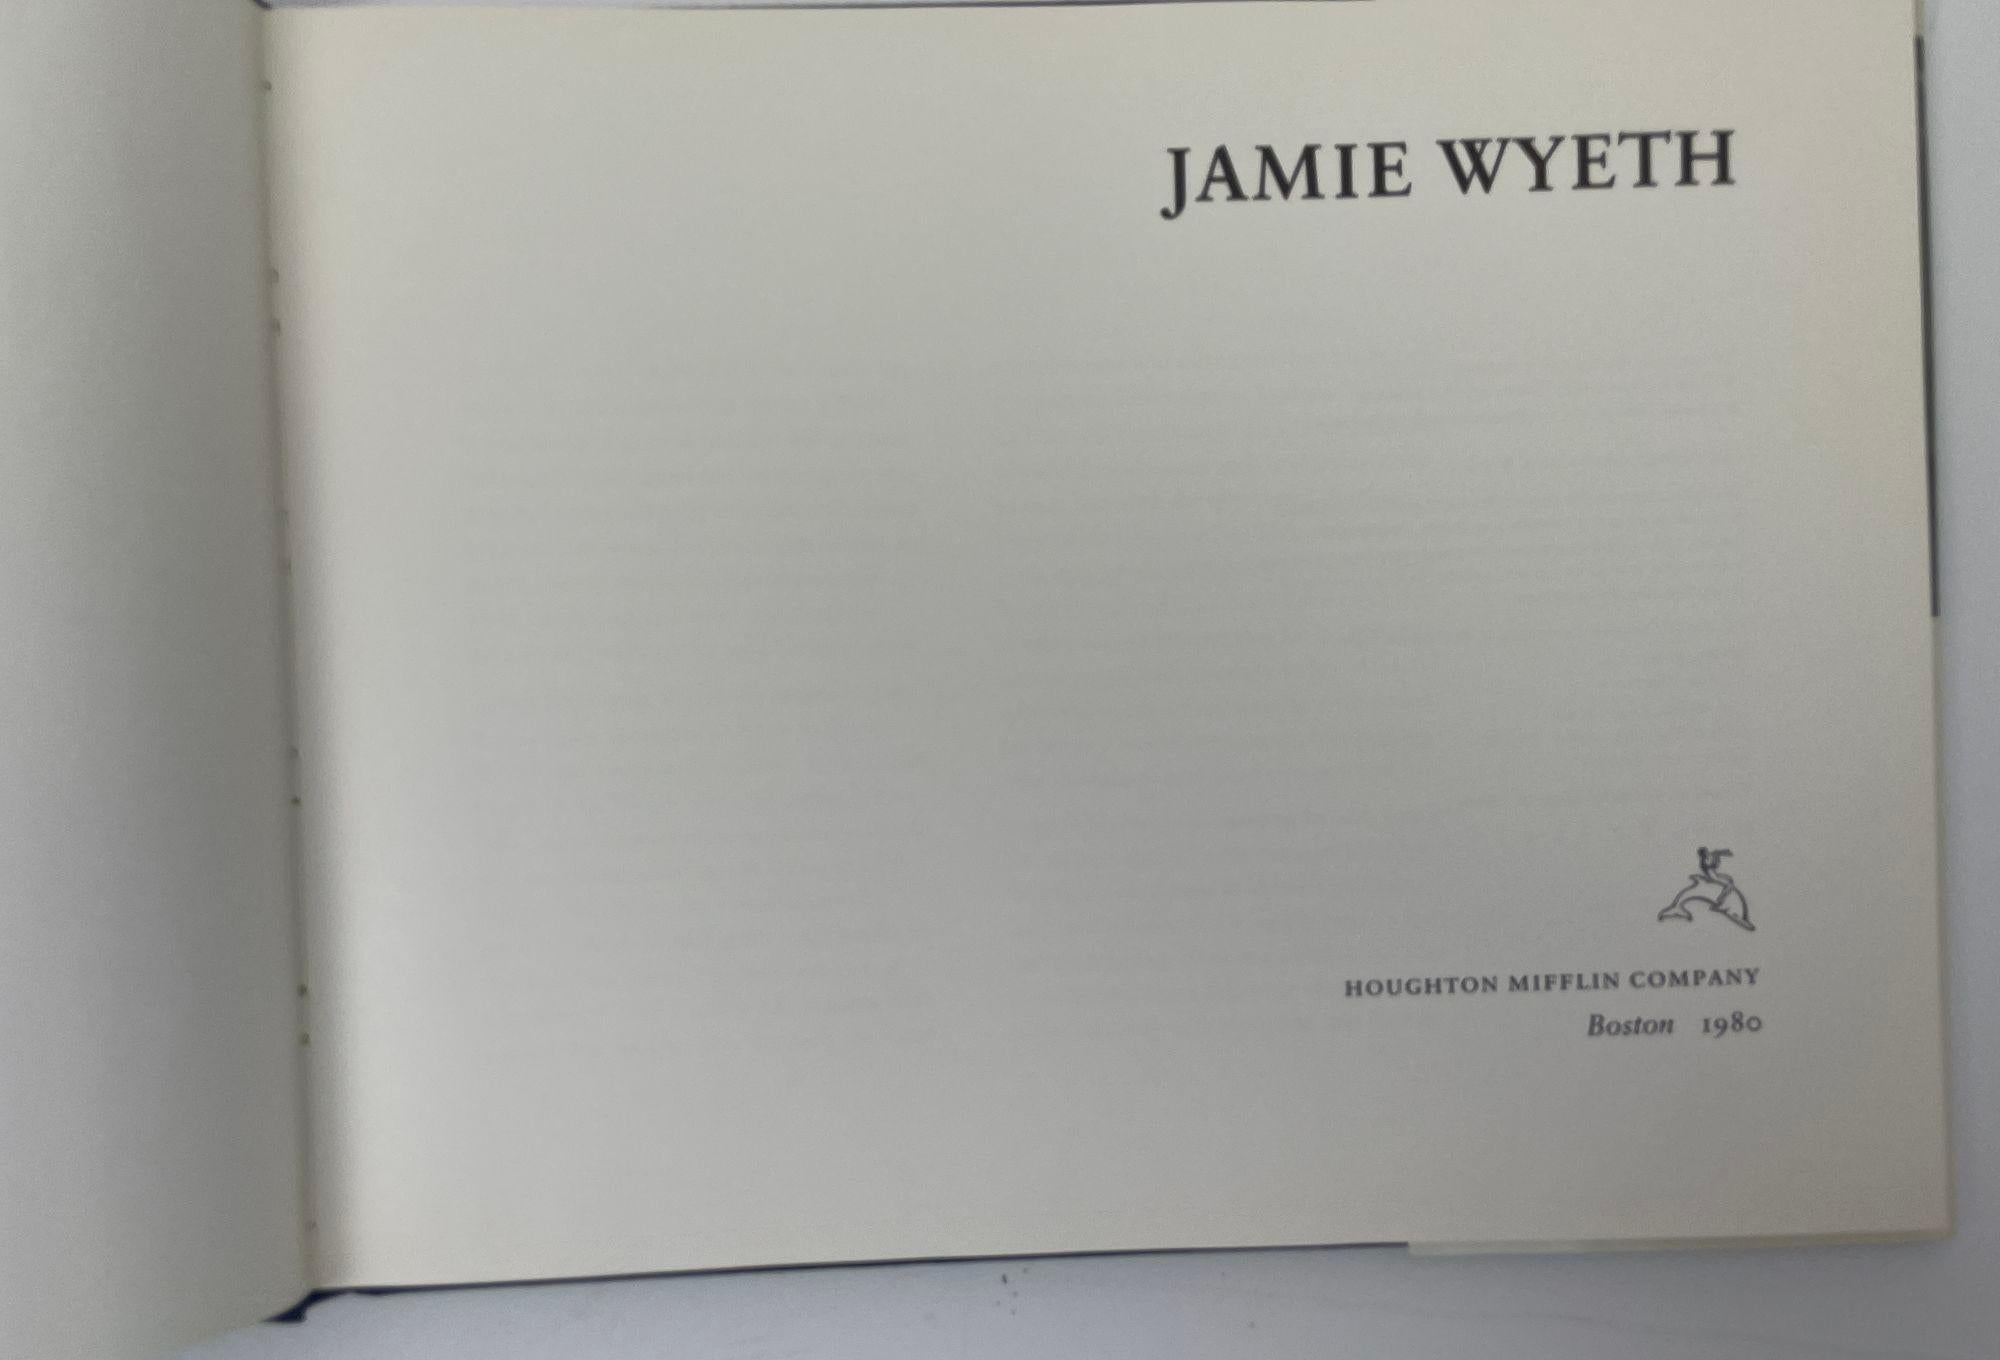 Jamie Wyeth by Jamie Wyeth Hardcover Book 1980 1st Ed. In Good Condition For Sale In North Hollywood, CA